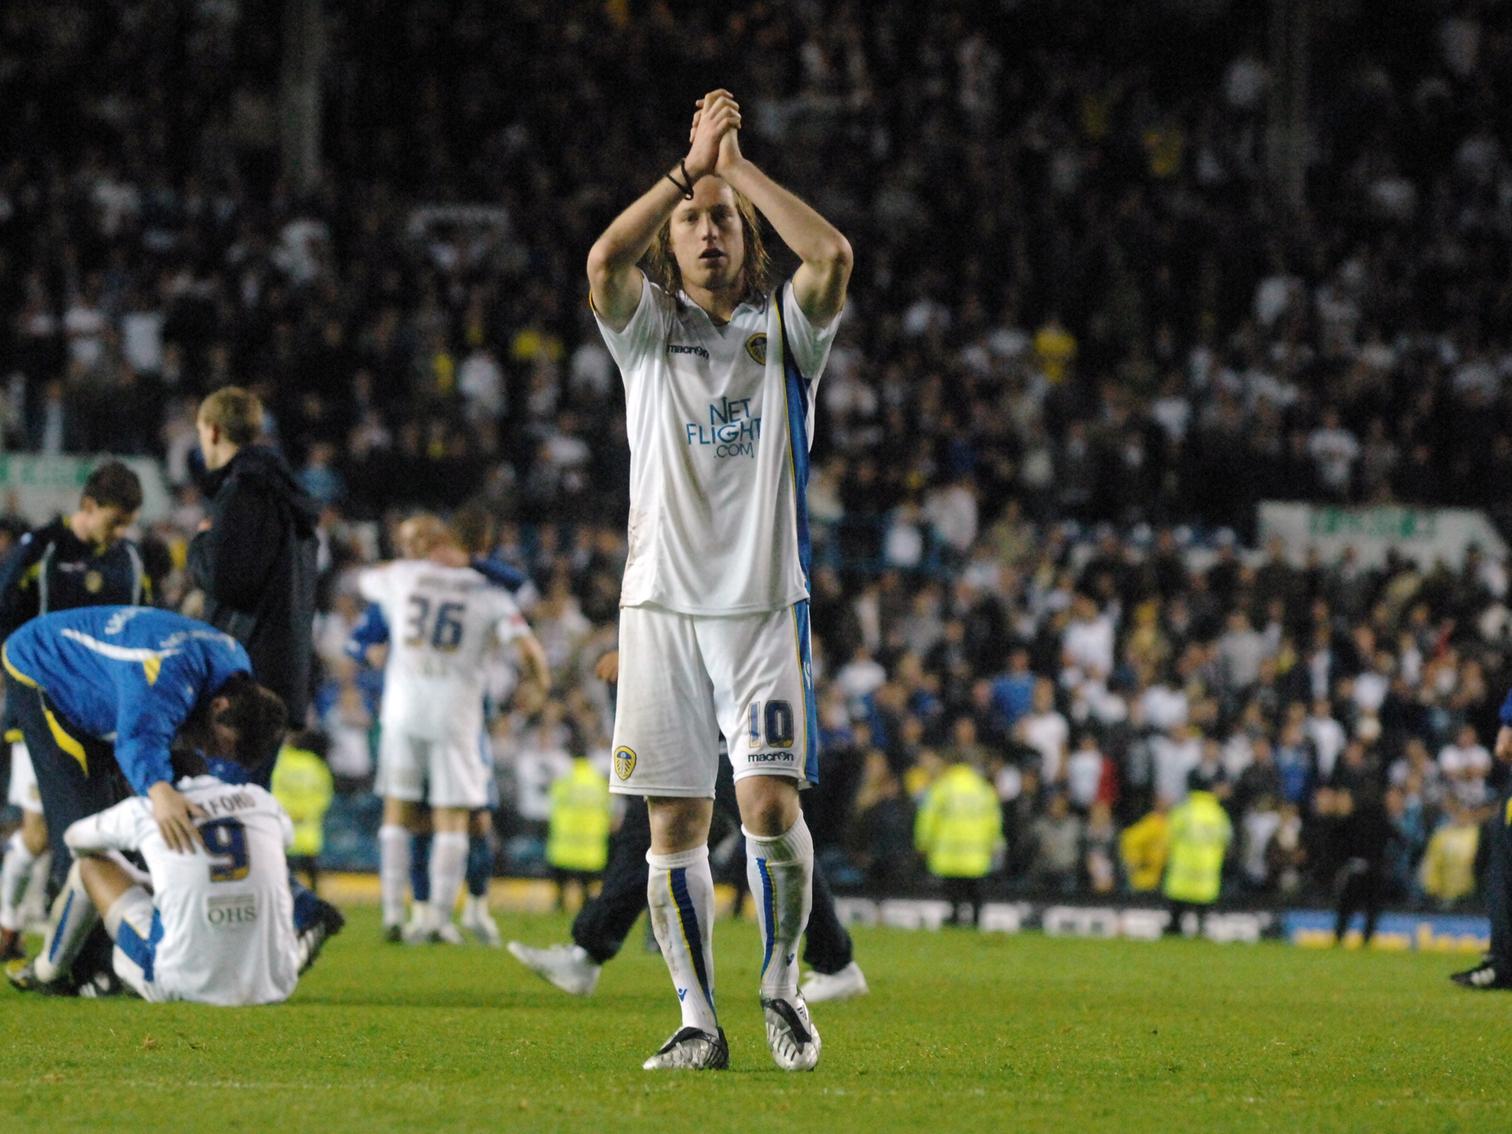 "Play off, second leg. Luciano Becchio sent the place mental for a short time anyway" - Billy Ball @BillyBall88